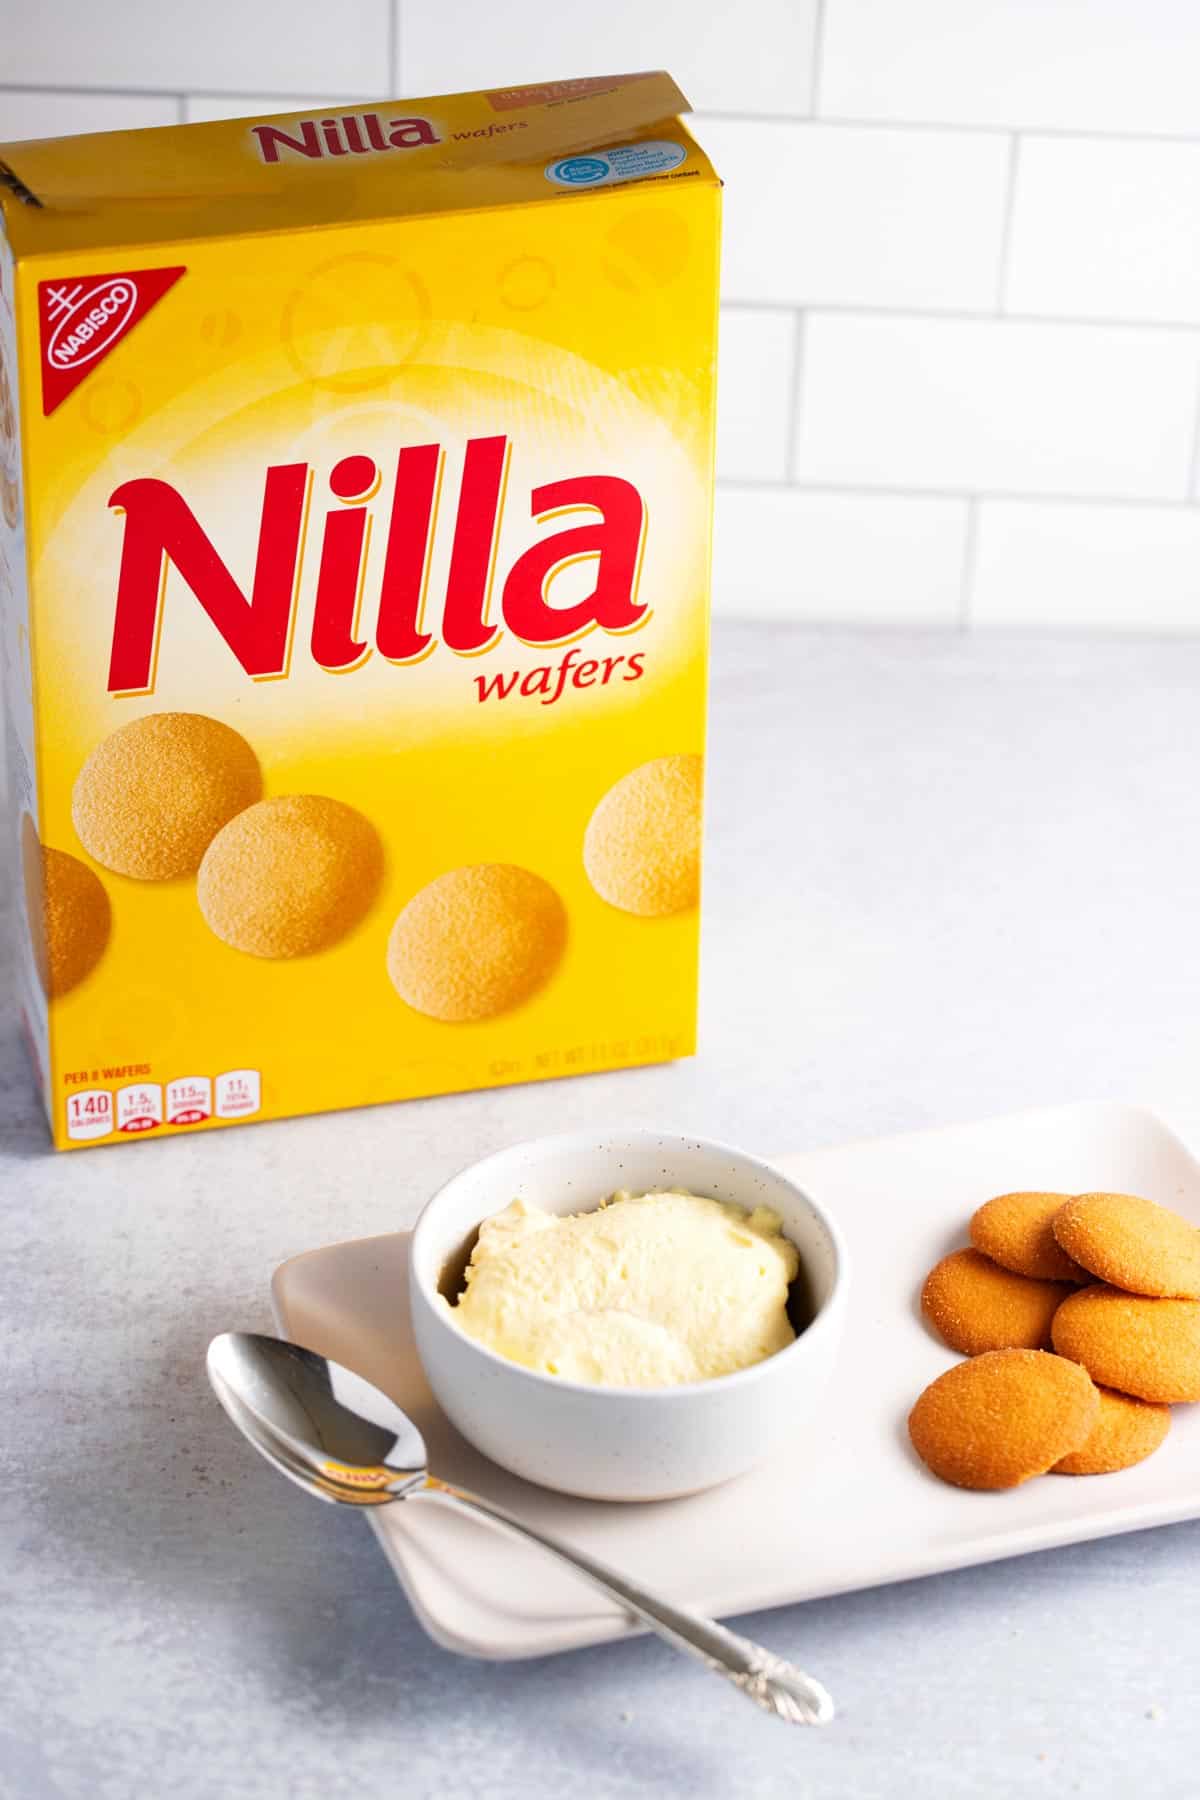 A bowl of banana pudding made with vanilla wafers with a box of Nilla wafers in the background.